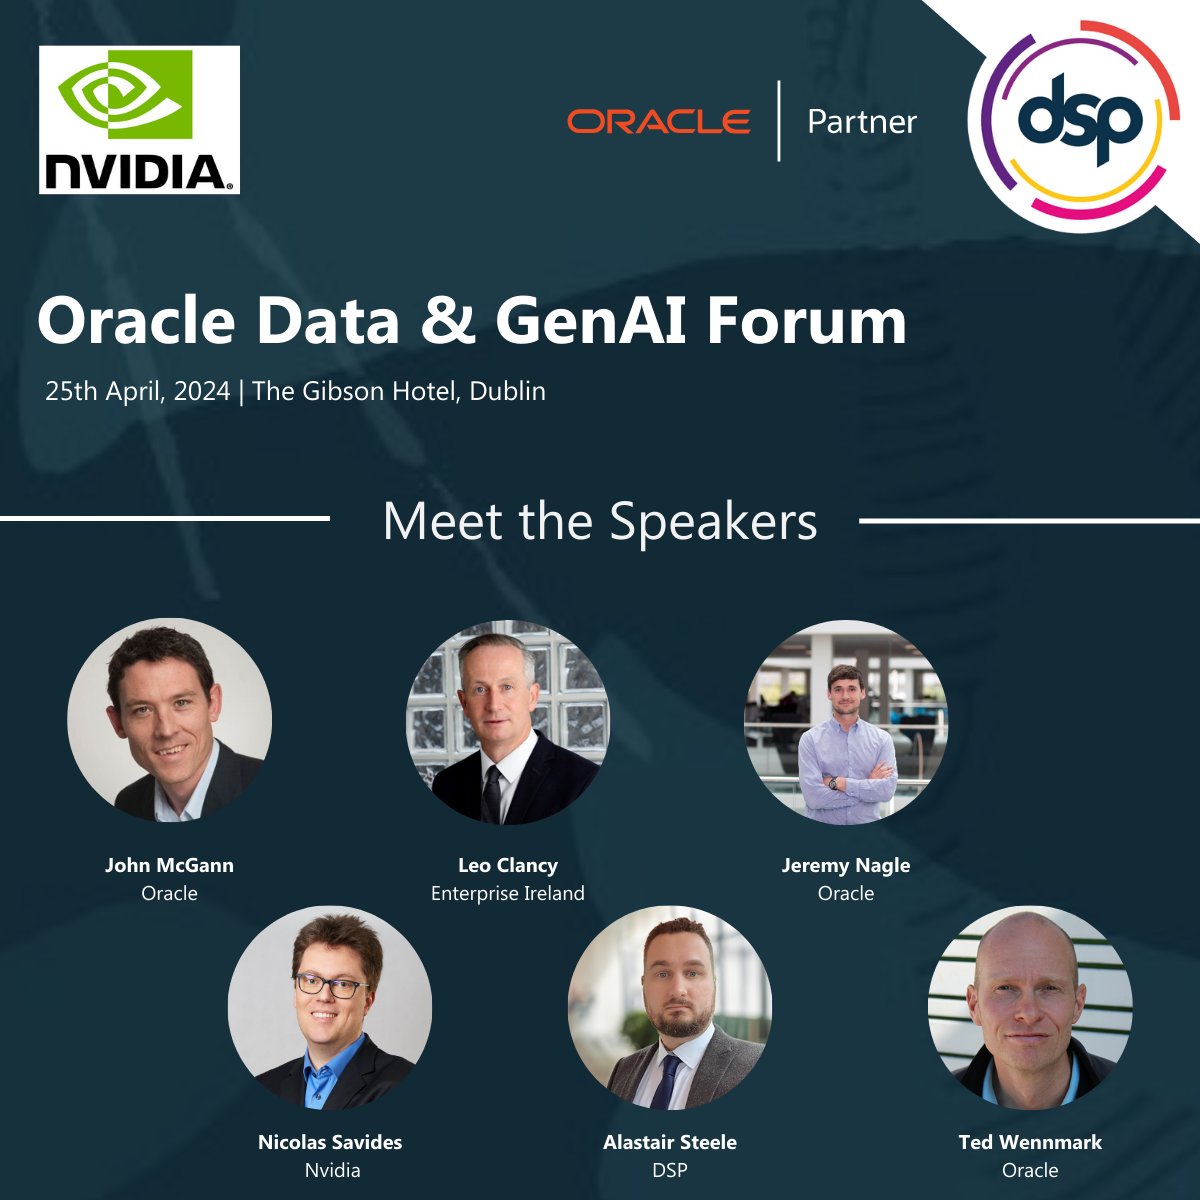 We're excited to share the speakers for the Oracle Data & GenAI Forum. Hear from sessions by John McGann, Jeremy Nagle and Ted Wennmark from Oracle, Nicolas Savides from Nvidia, Leo Clancy from Enterprise Ireland and Alastair Steele from DSP. Register now: bit.ly/3J2vFwQ